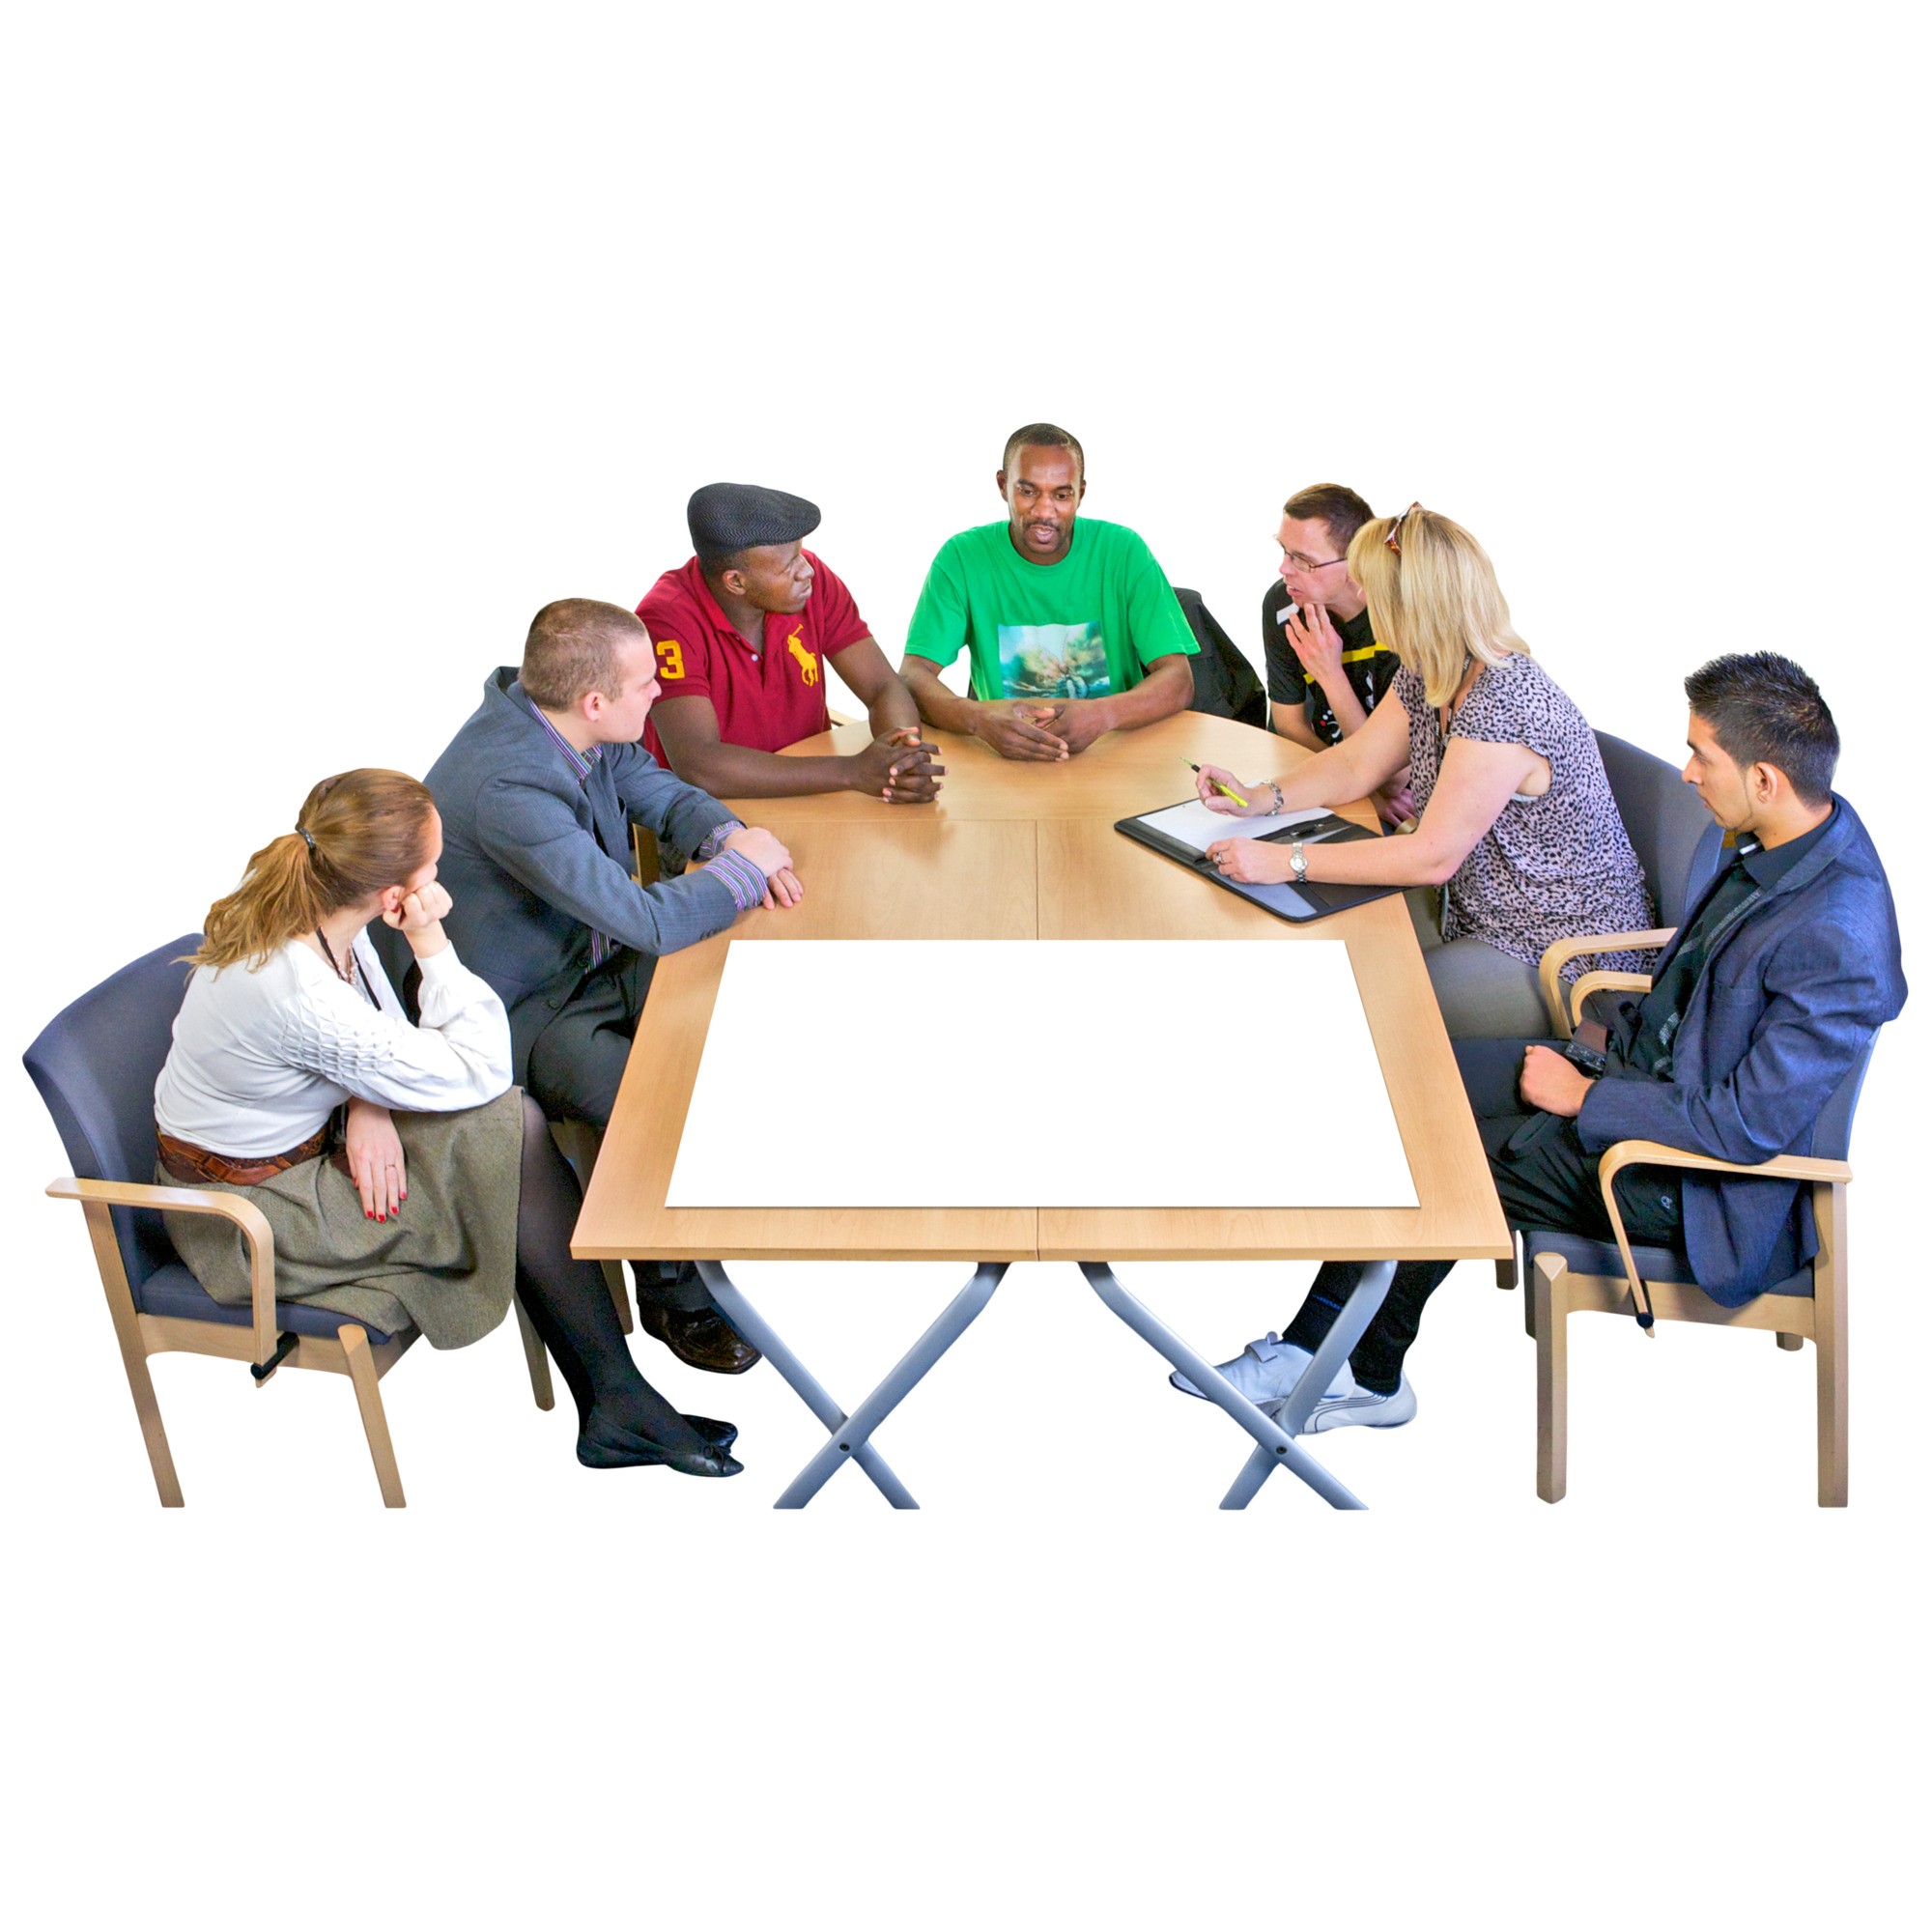 people sat round a table in a meeting